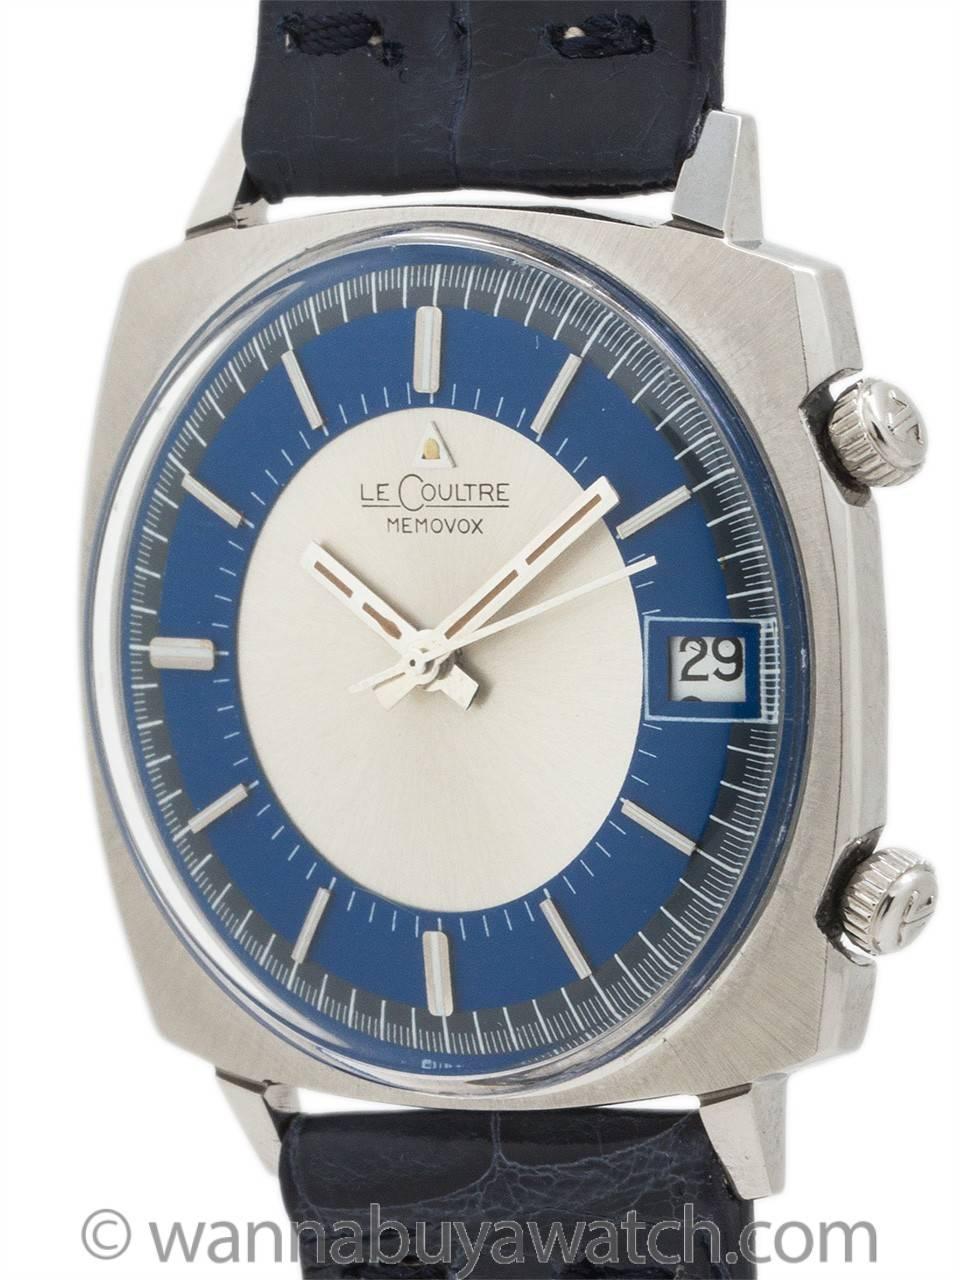 Lecoultre Memovox Alarm circa 1960’s
$2,250.00
 
LeCoultre manual wind Memovox alarm circa 1960’s. Great looking design featuring 35 x 39mm cushion shaped stainless steel case with fine brushed finish bezel, acrylic crystal, and great condition